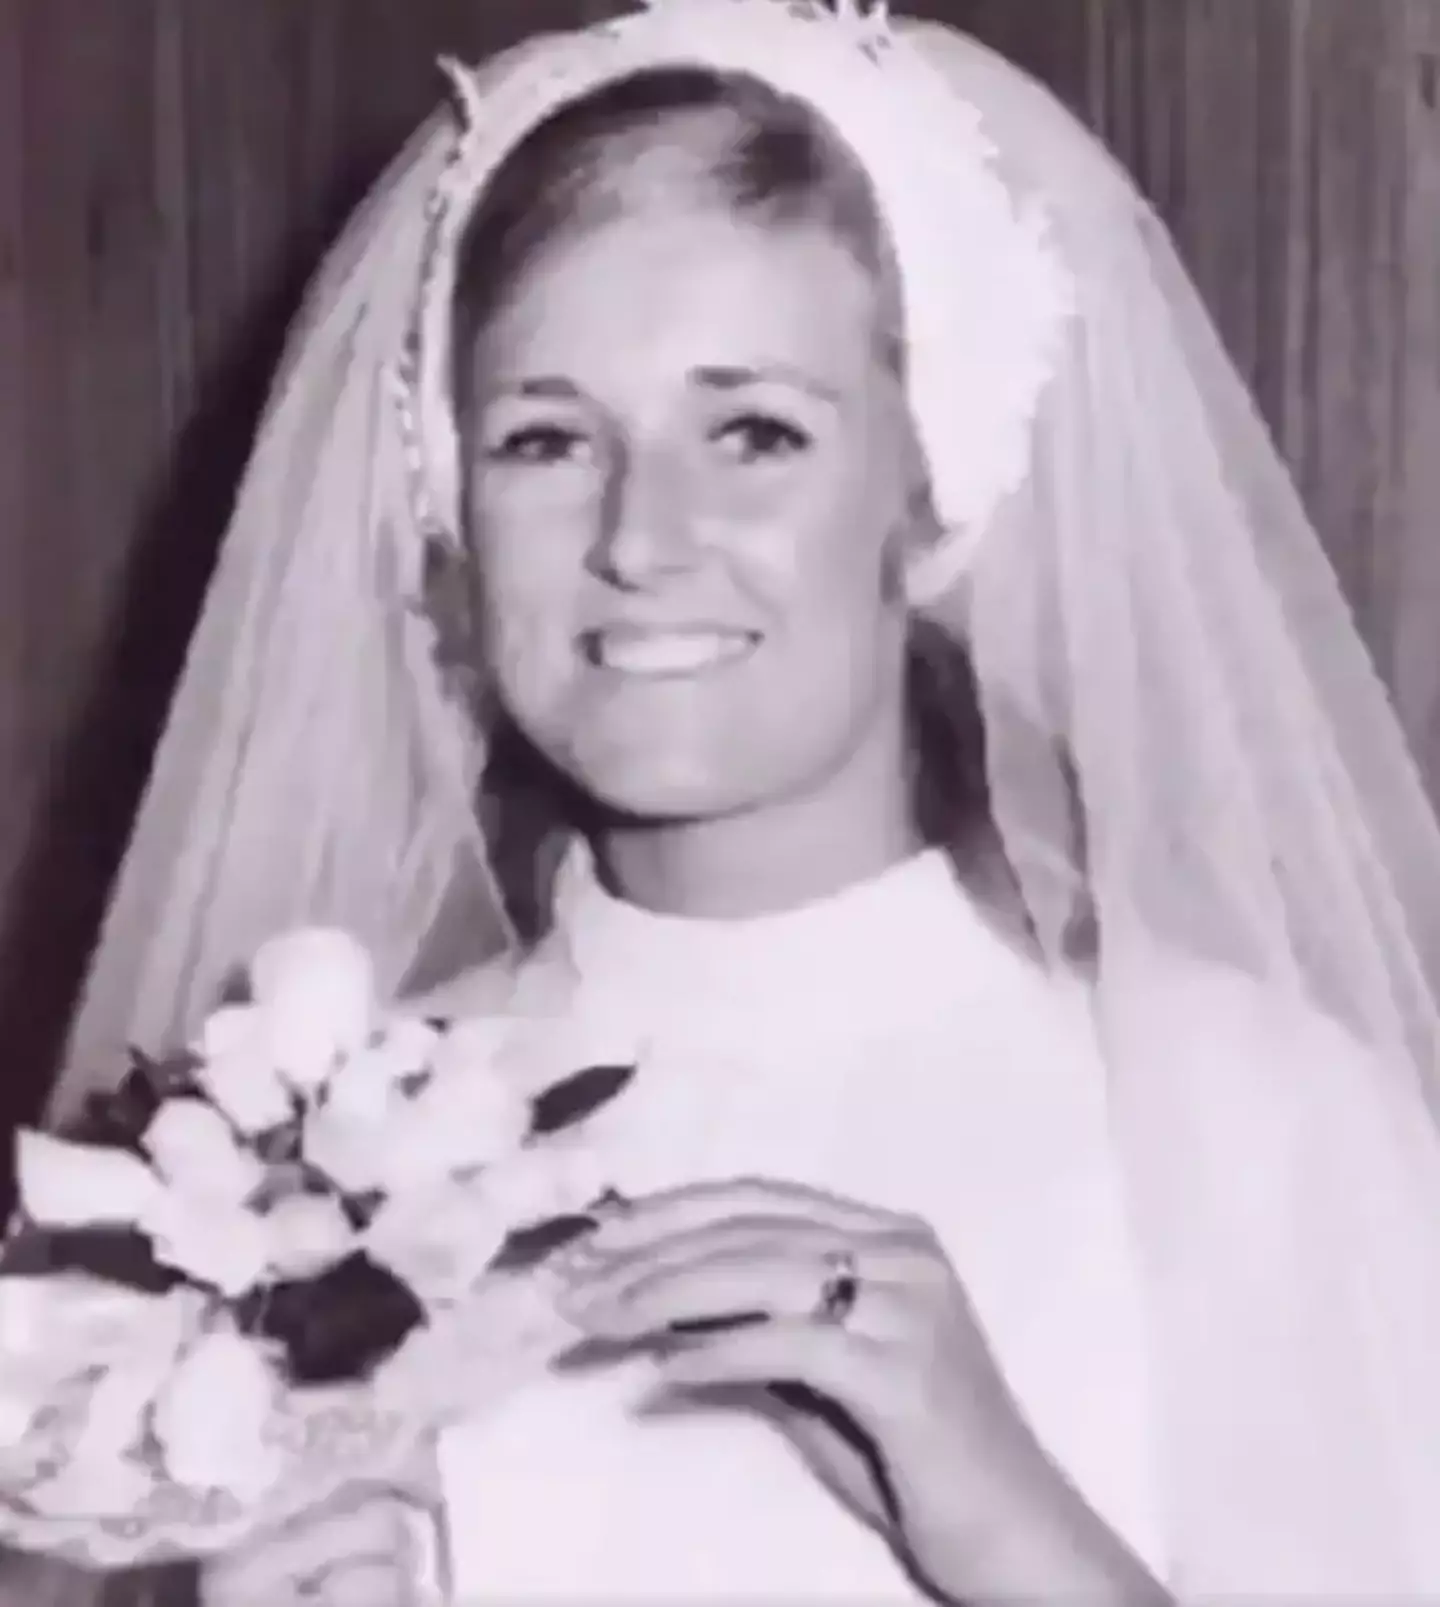 Lynette, on her wedding day to her one-day killer.